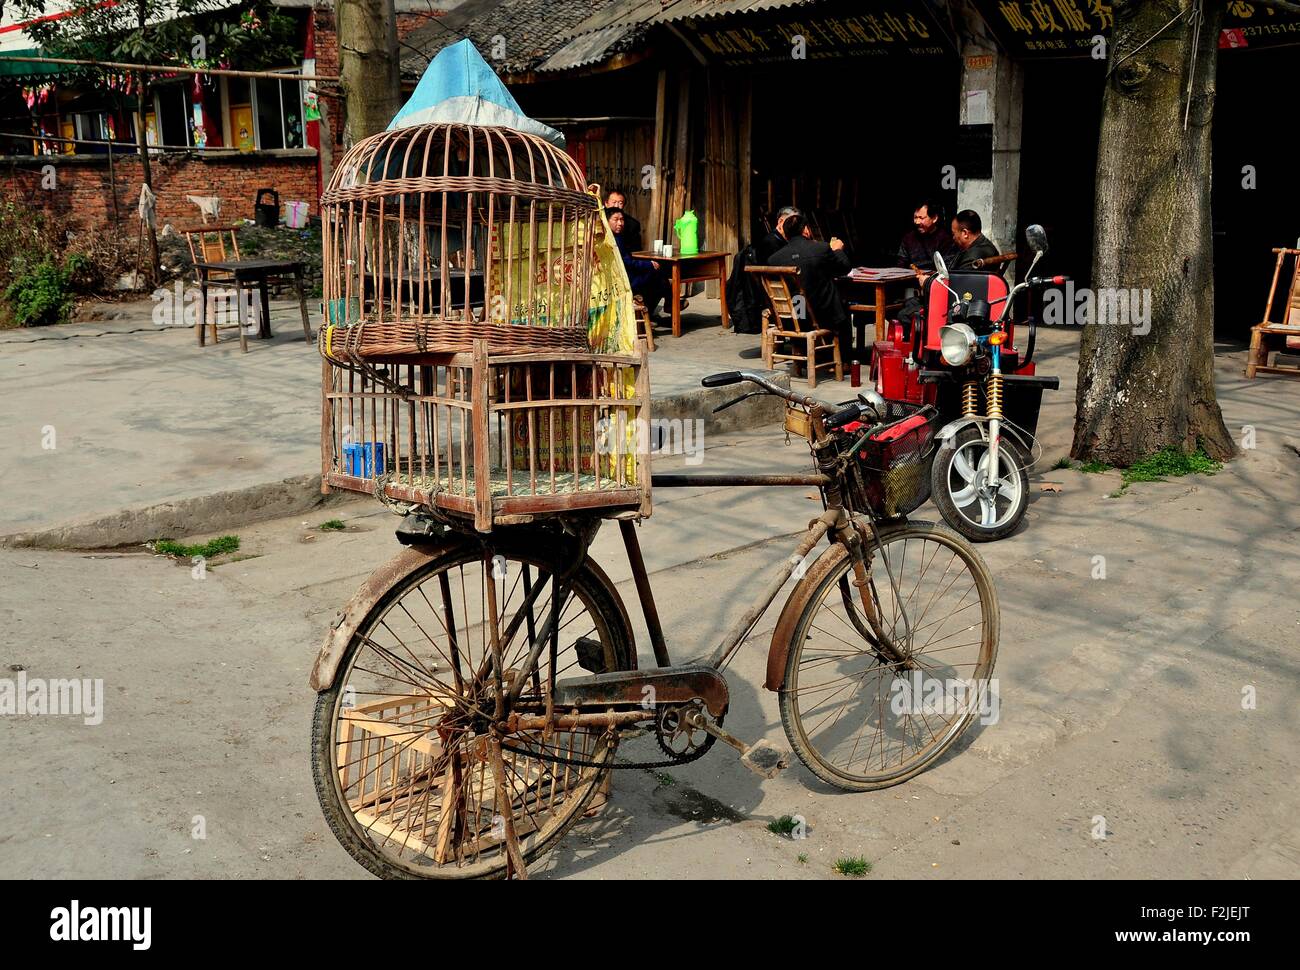 Long Feng, China:   Bicycle with two wooden bird cages strapped on the back parked near a group of men seated at tables Stock Photo